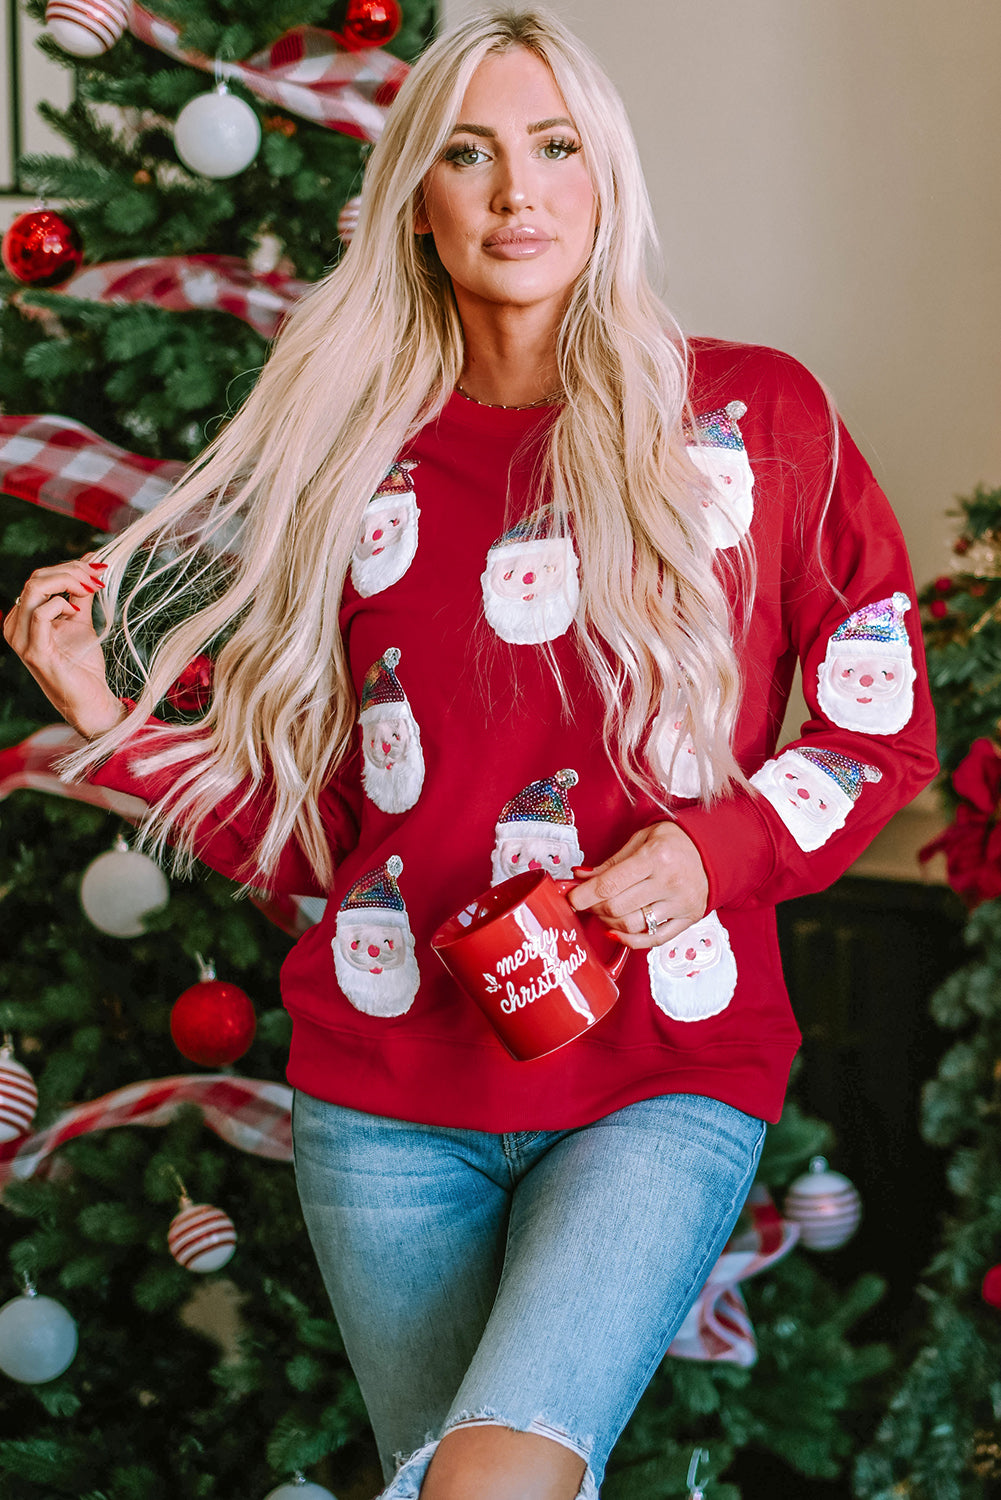 Fiery Red Sequined Christmas Santa Clause Graphic Sweatshirt Red-2 70%Polyester+30%Cotton Graphic Sweatshirts JT's Designer Fashion